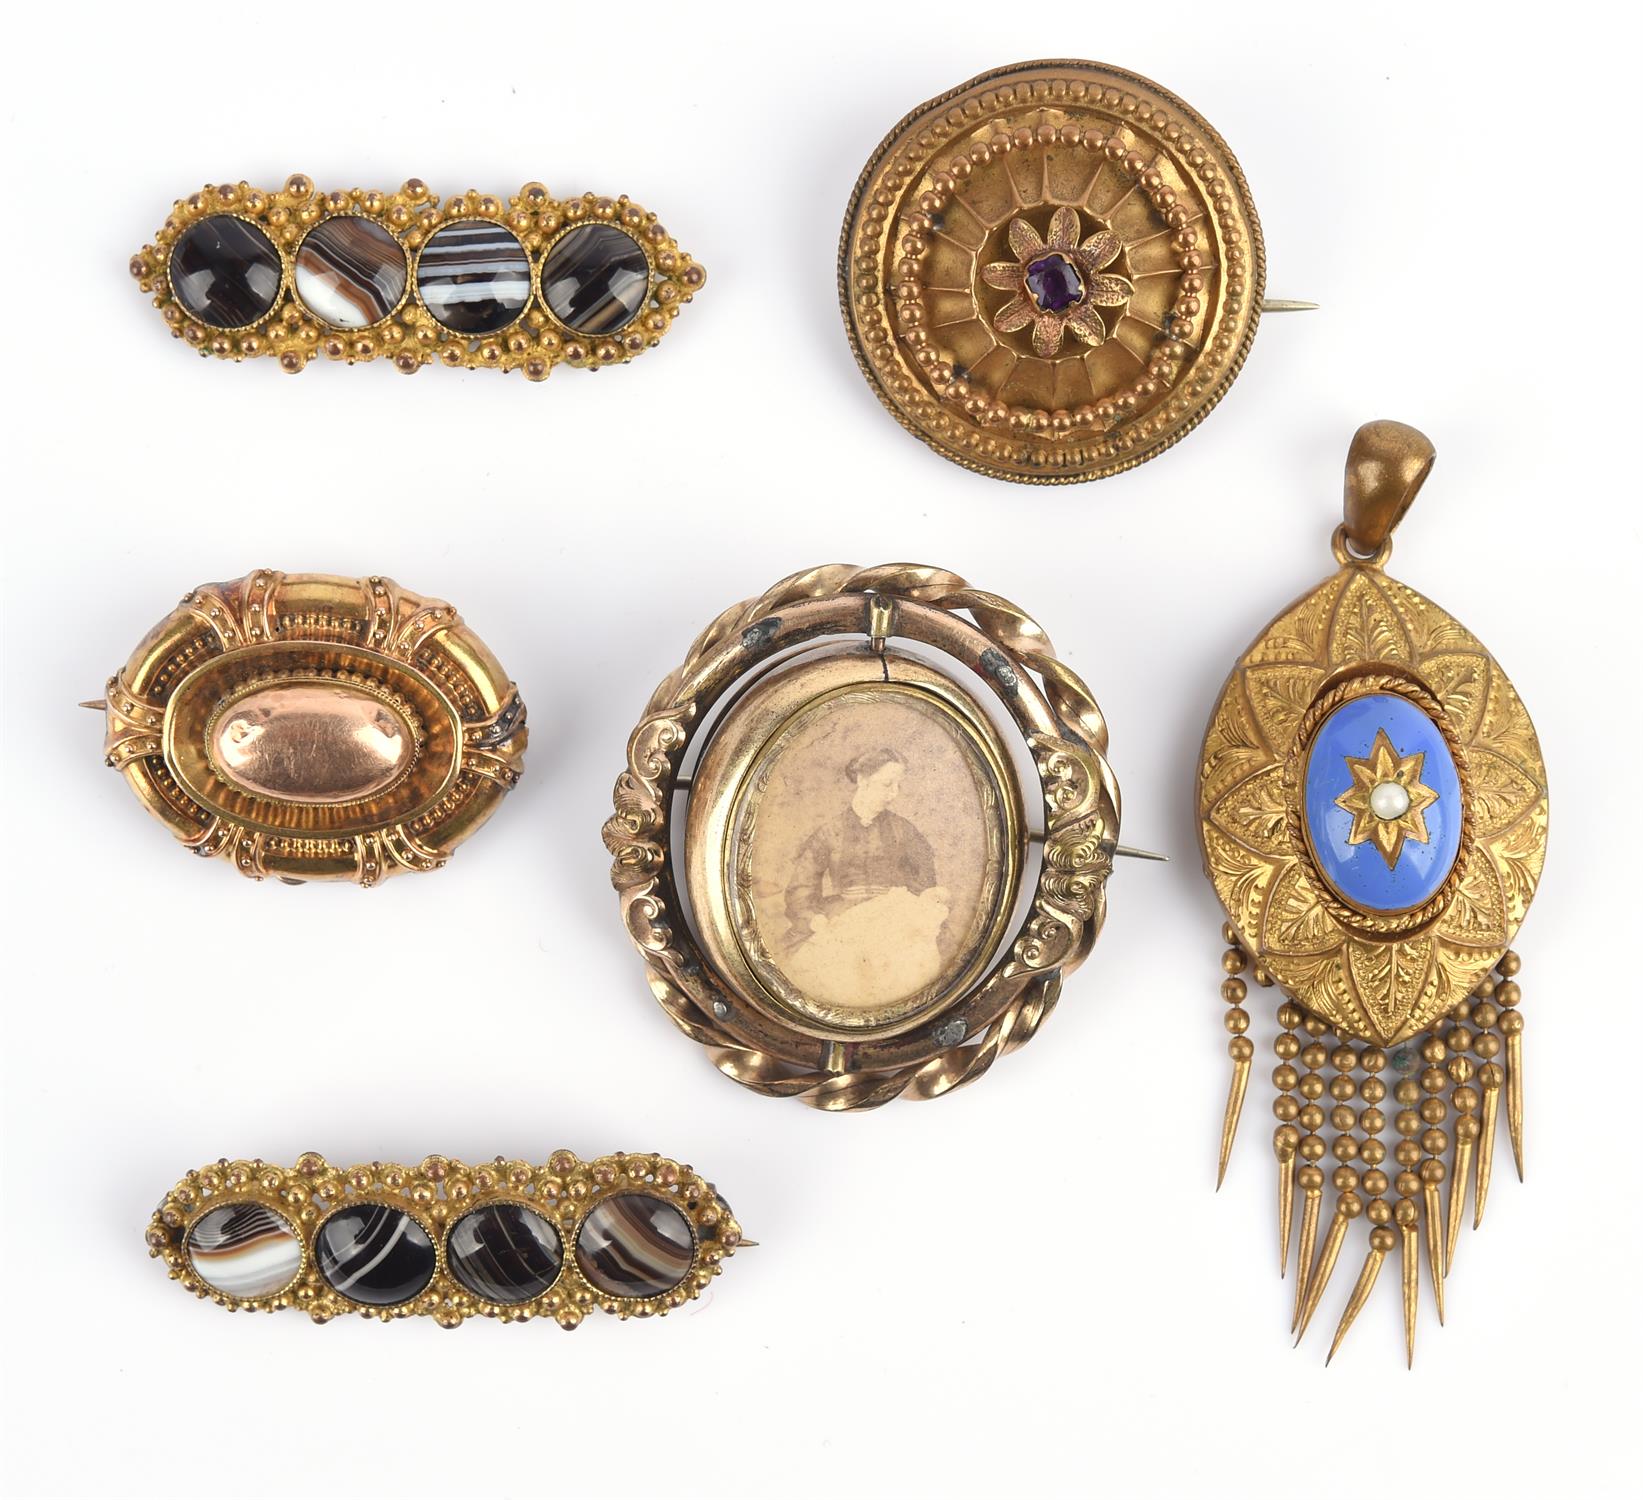 Six Victorian brooches, five in gilt metal including one swivel brooch with a cameo to one side and